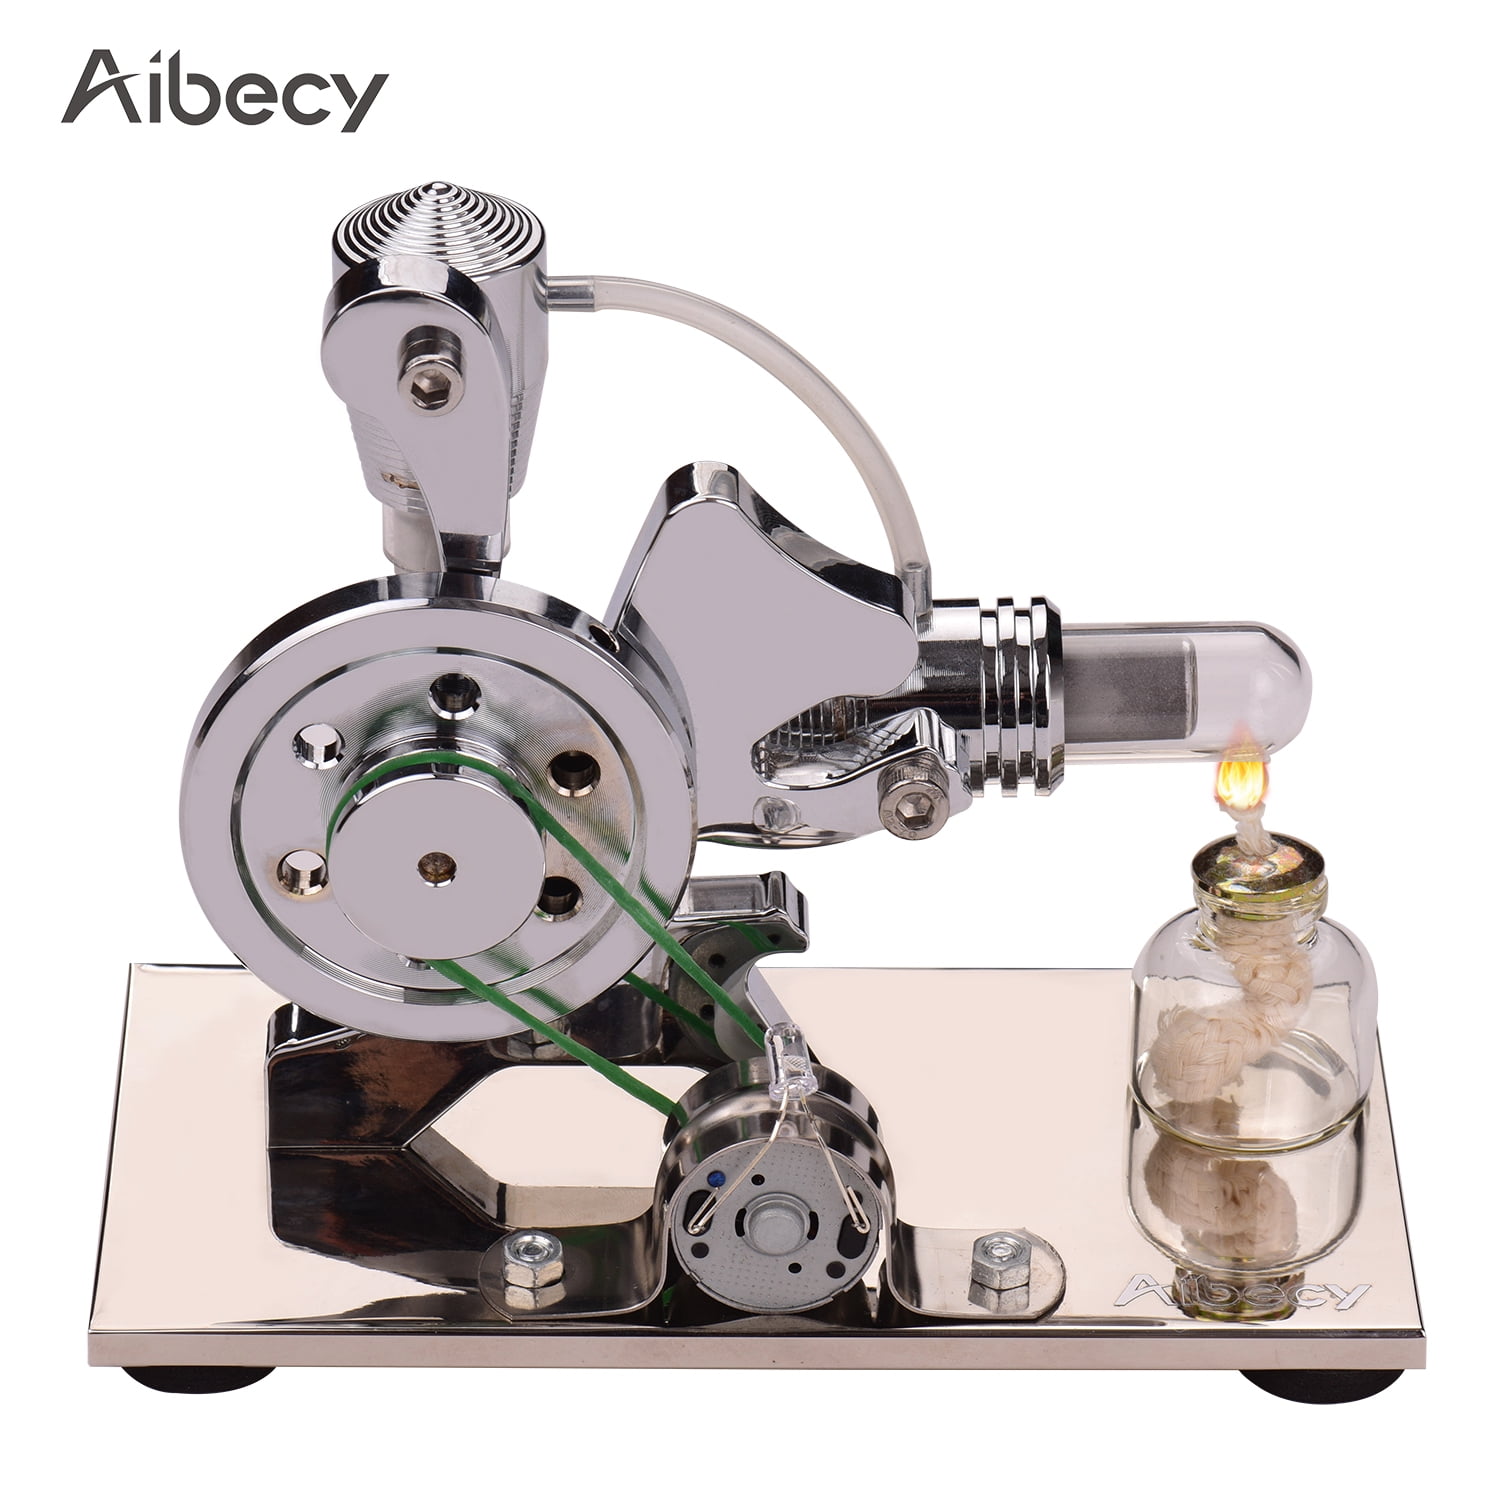 Mini Hot Air Stirling Engine Motor Model Gift Educational Toy Kit With LED Light 